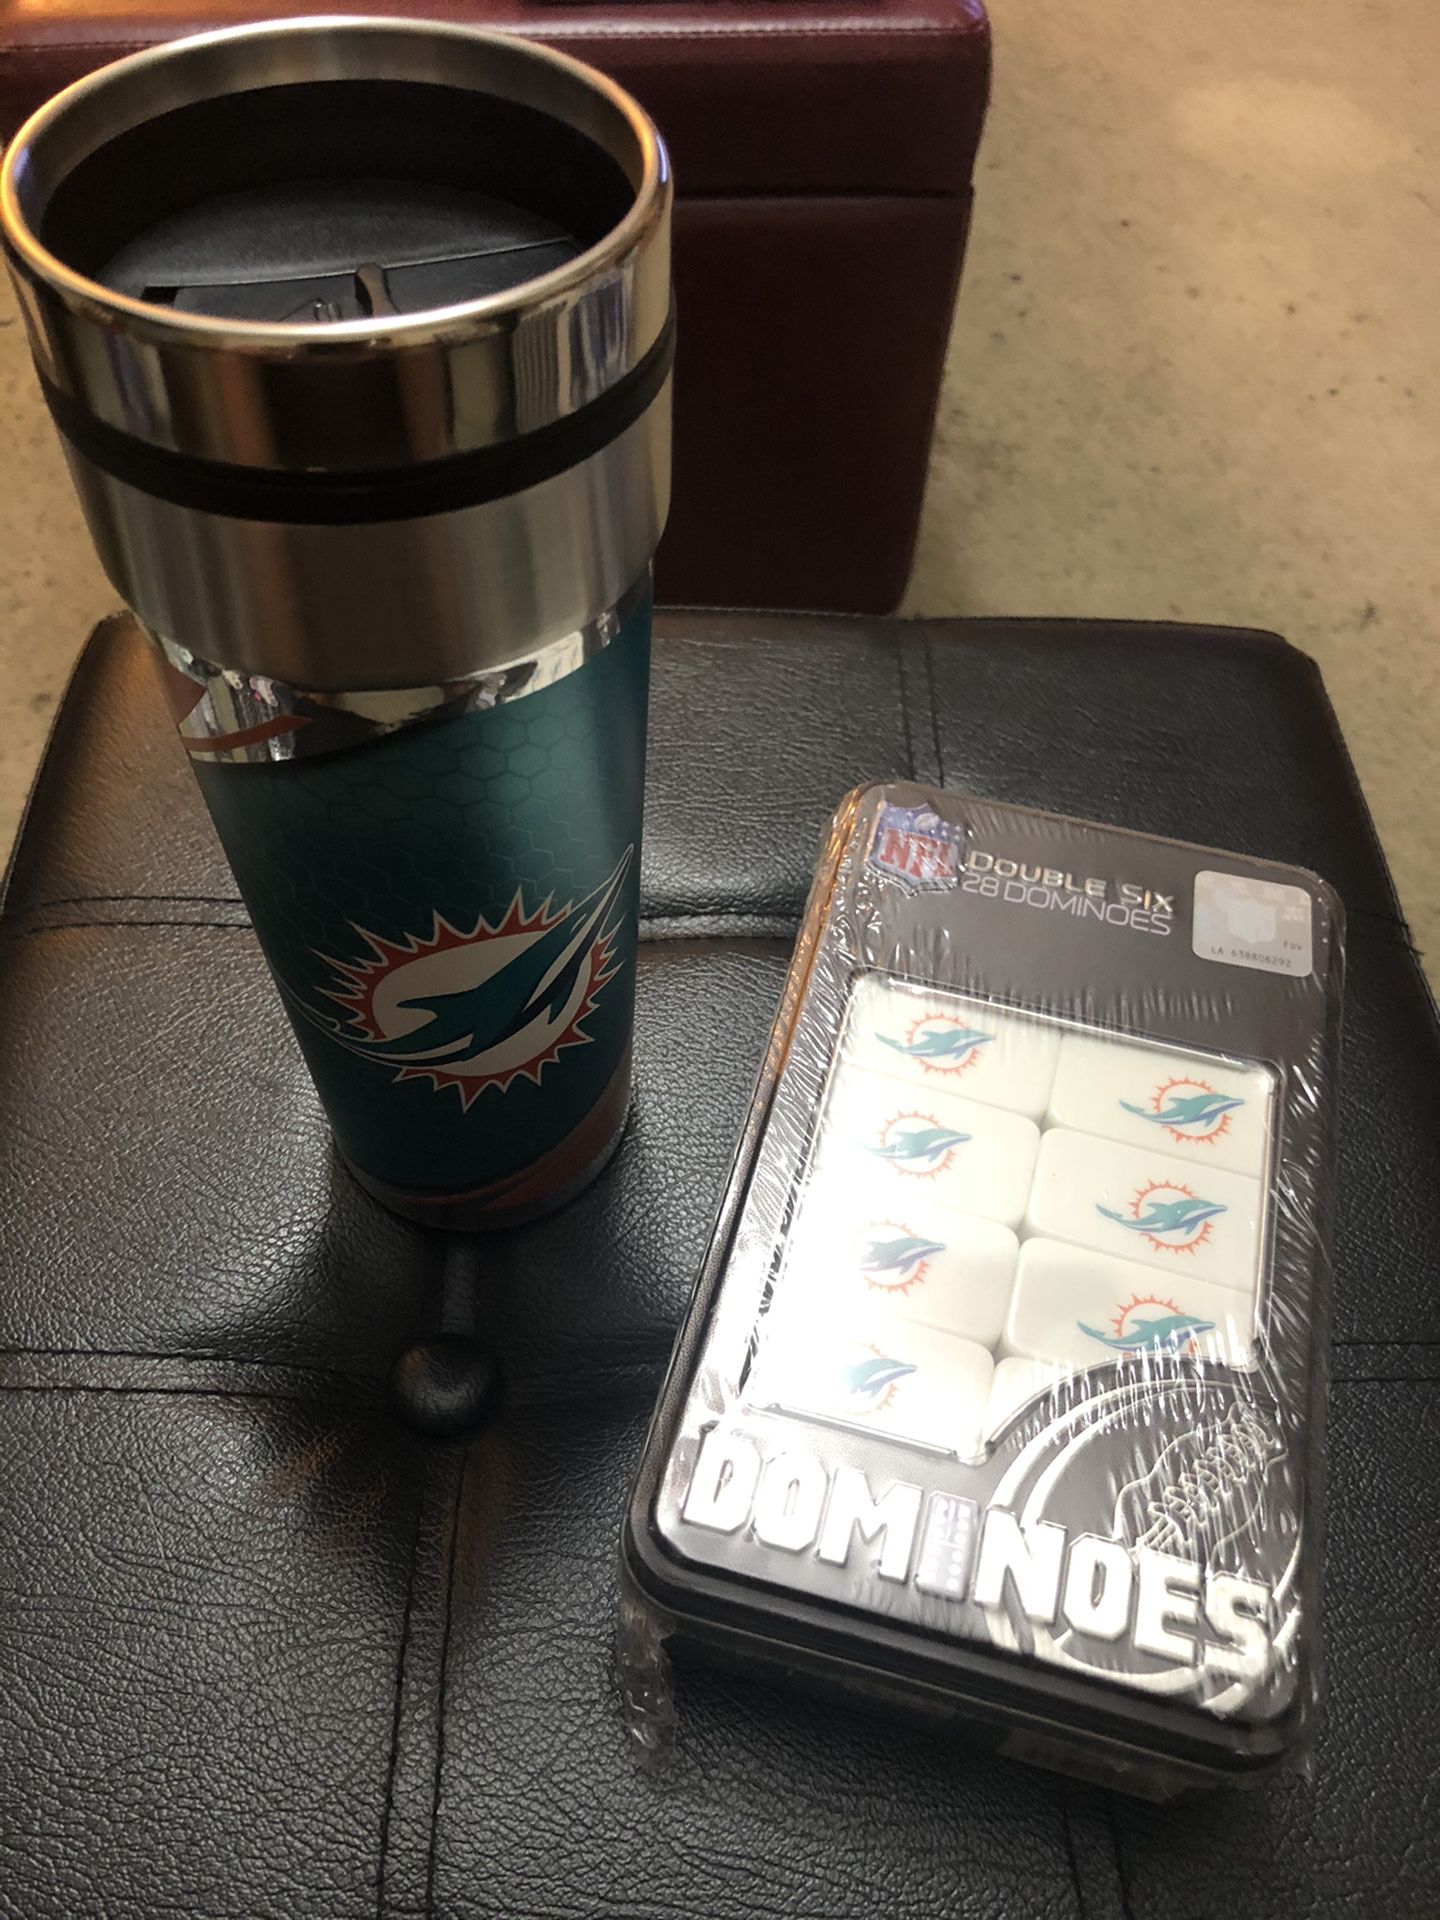 Miami Dolphins double six dominoes and cup